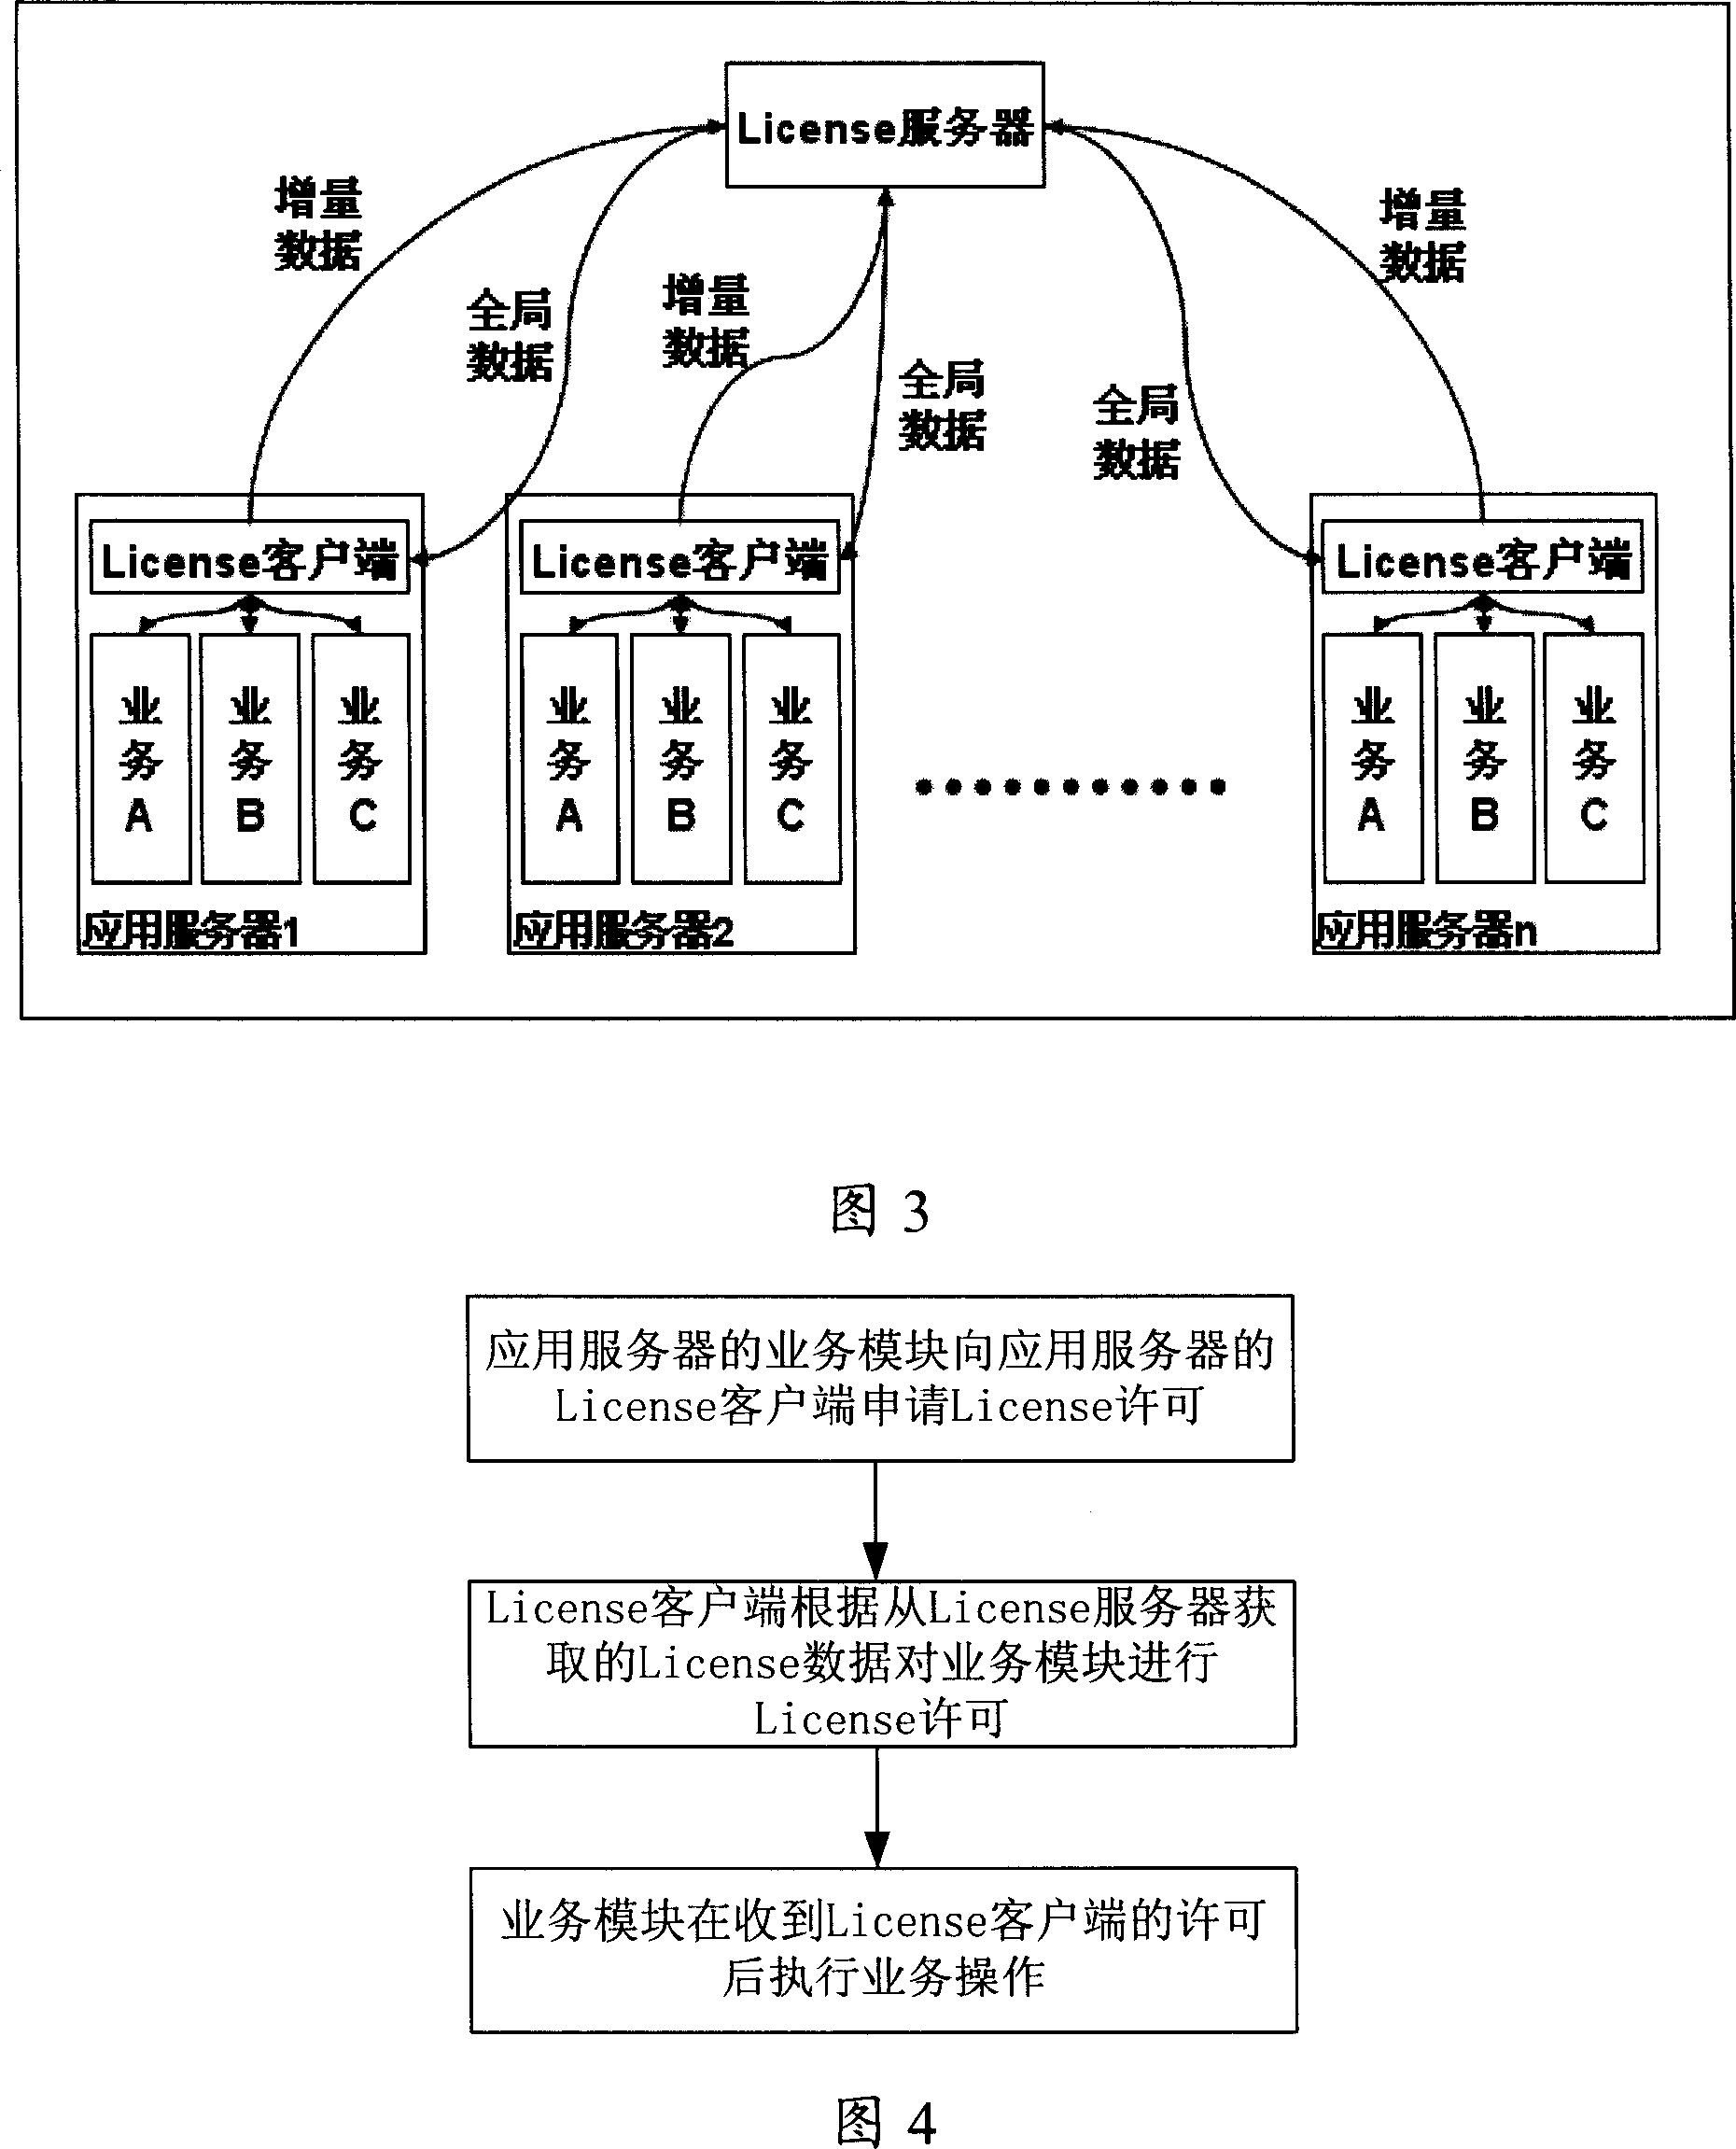 License control method and device